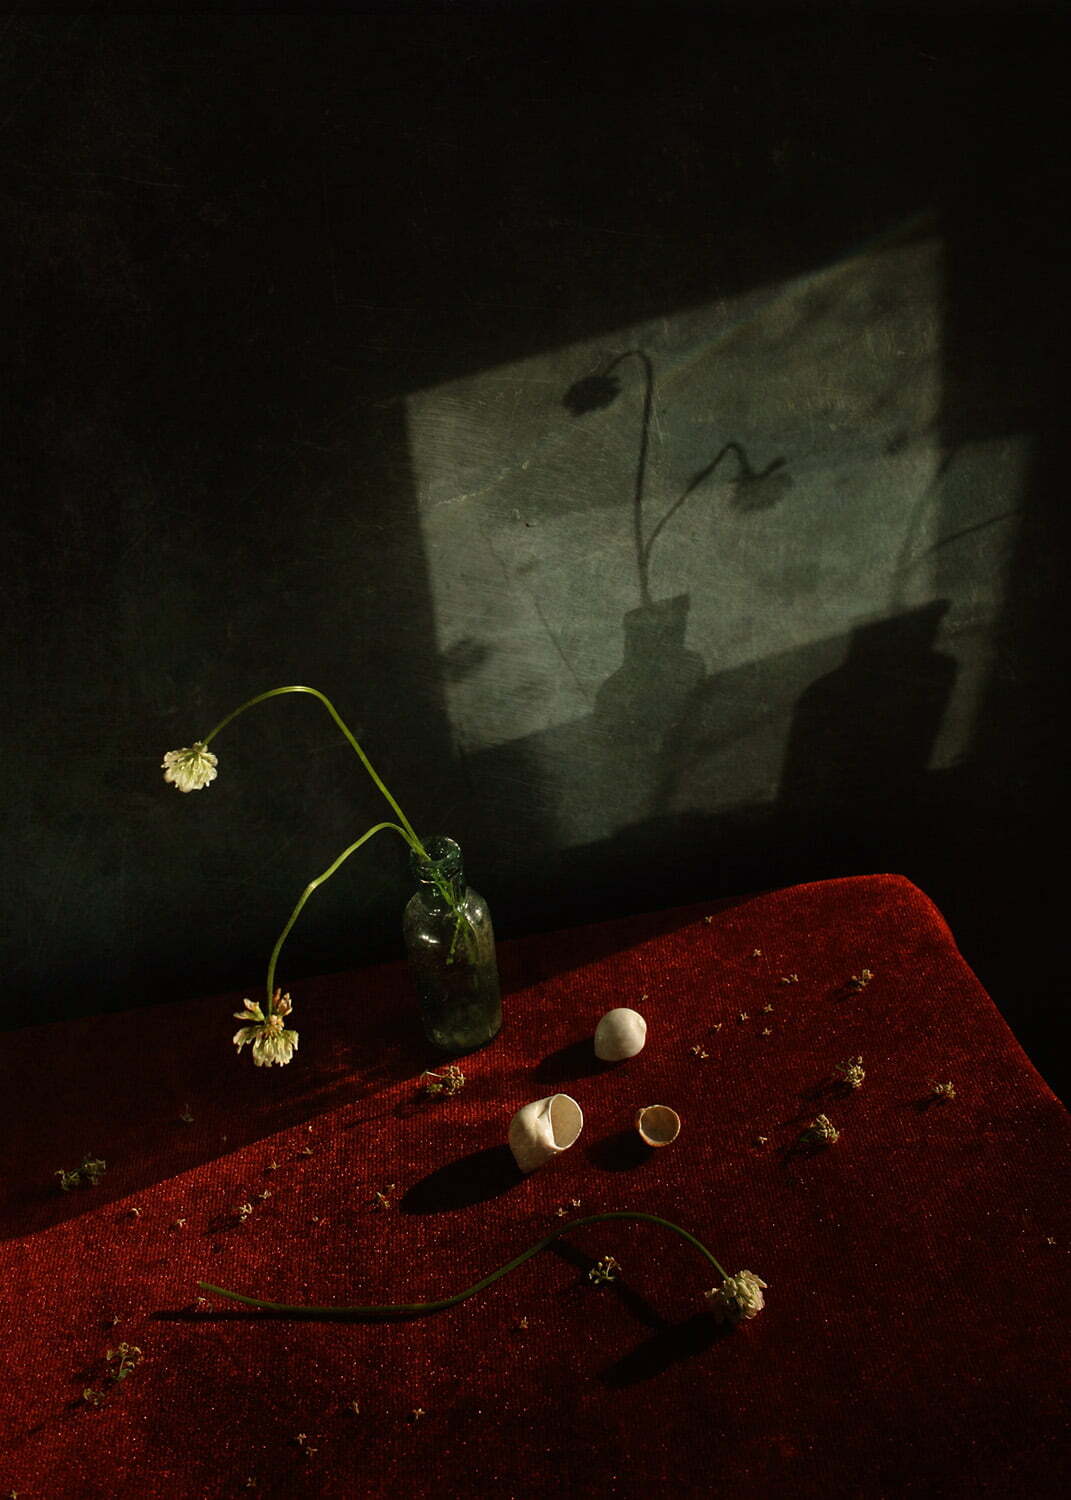 There Is a Shadow - Photographer Name: Maryia Sapego - Everything has a shadow, even a small flower. Copyright: © Maryia Sapego, Belarus, Shortlist, Open, Object, 2022 Sony World Photography Awards